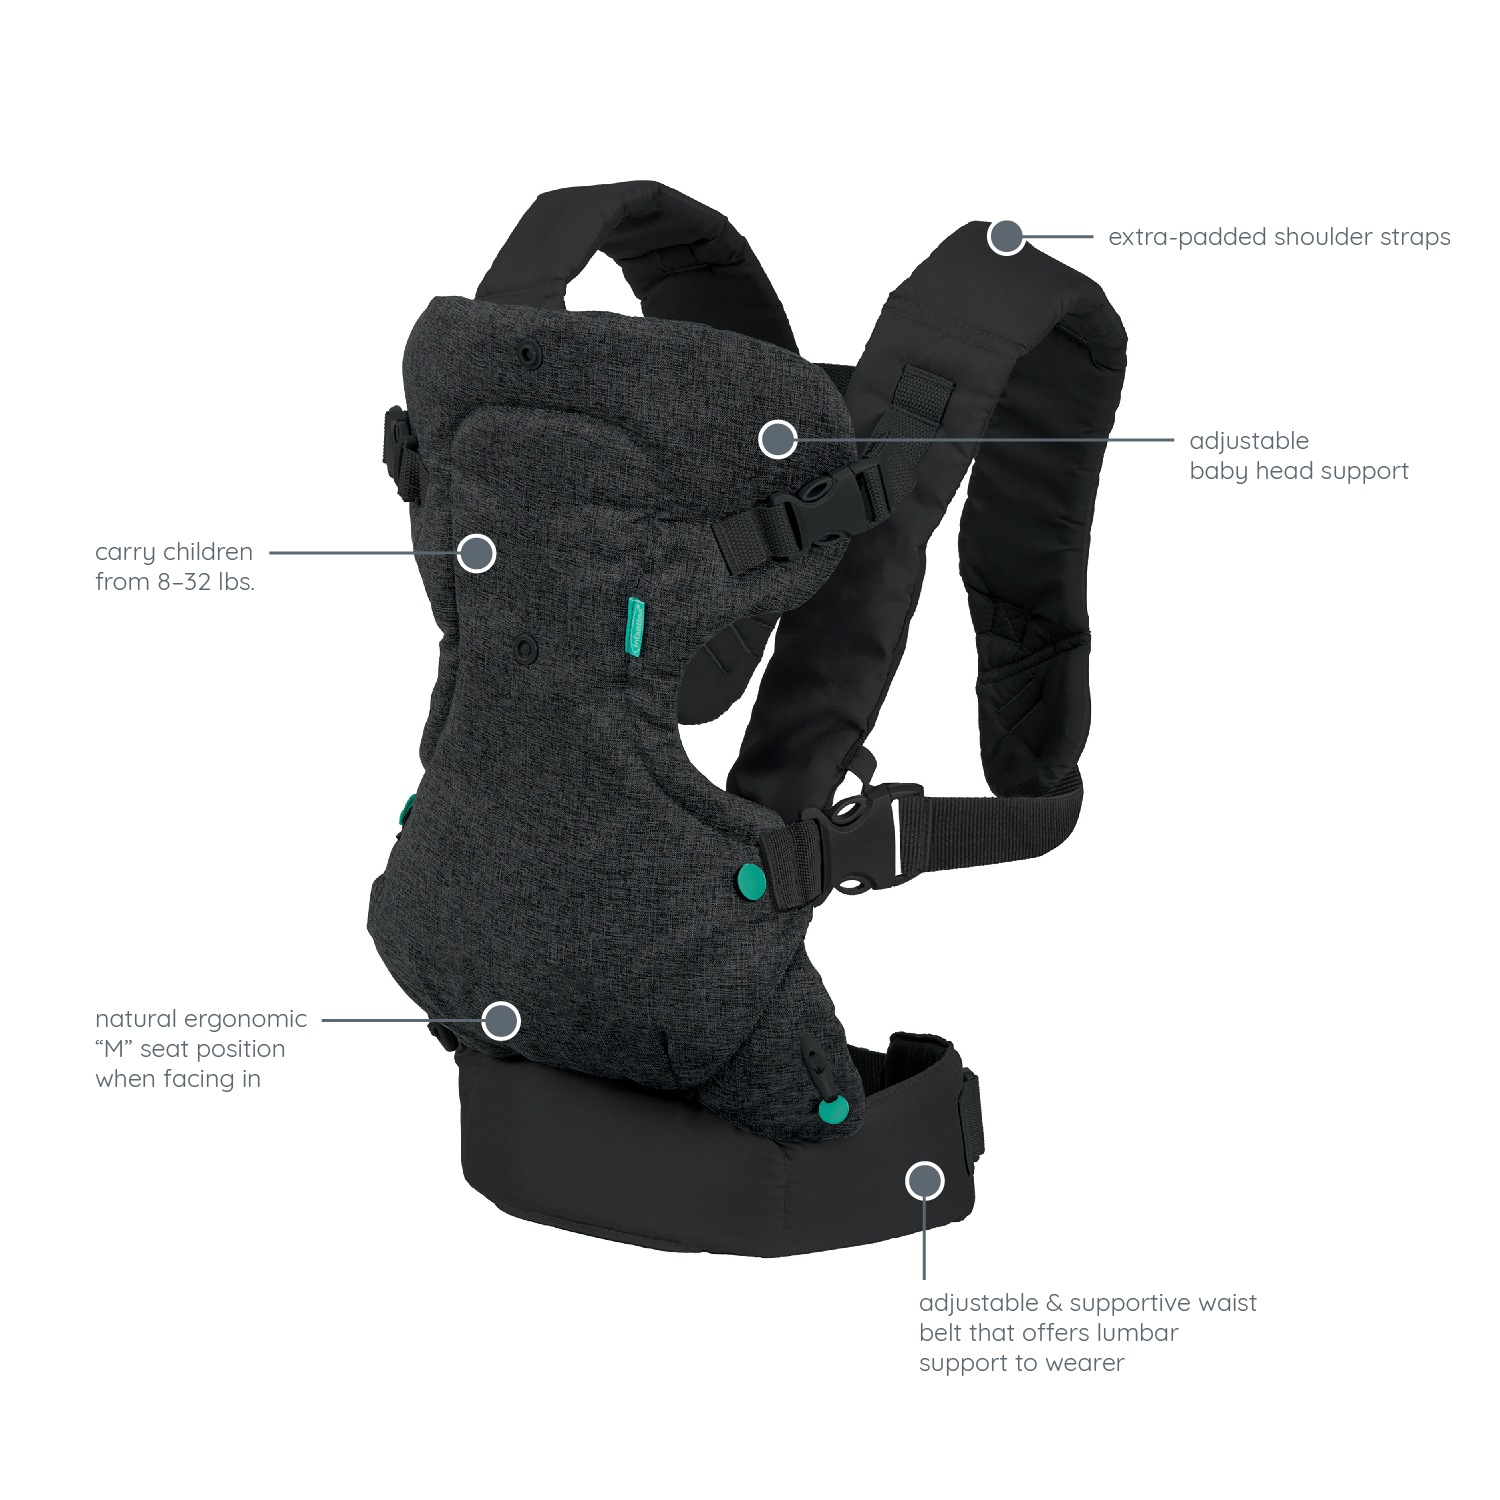 Infantino Flip 4-in-1 Convertible Baby Carrier, 4-Position, 8-32lb, Black - image 3 of 12